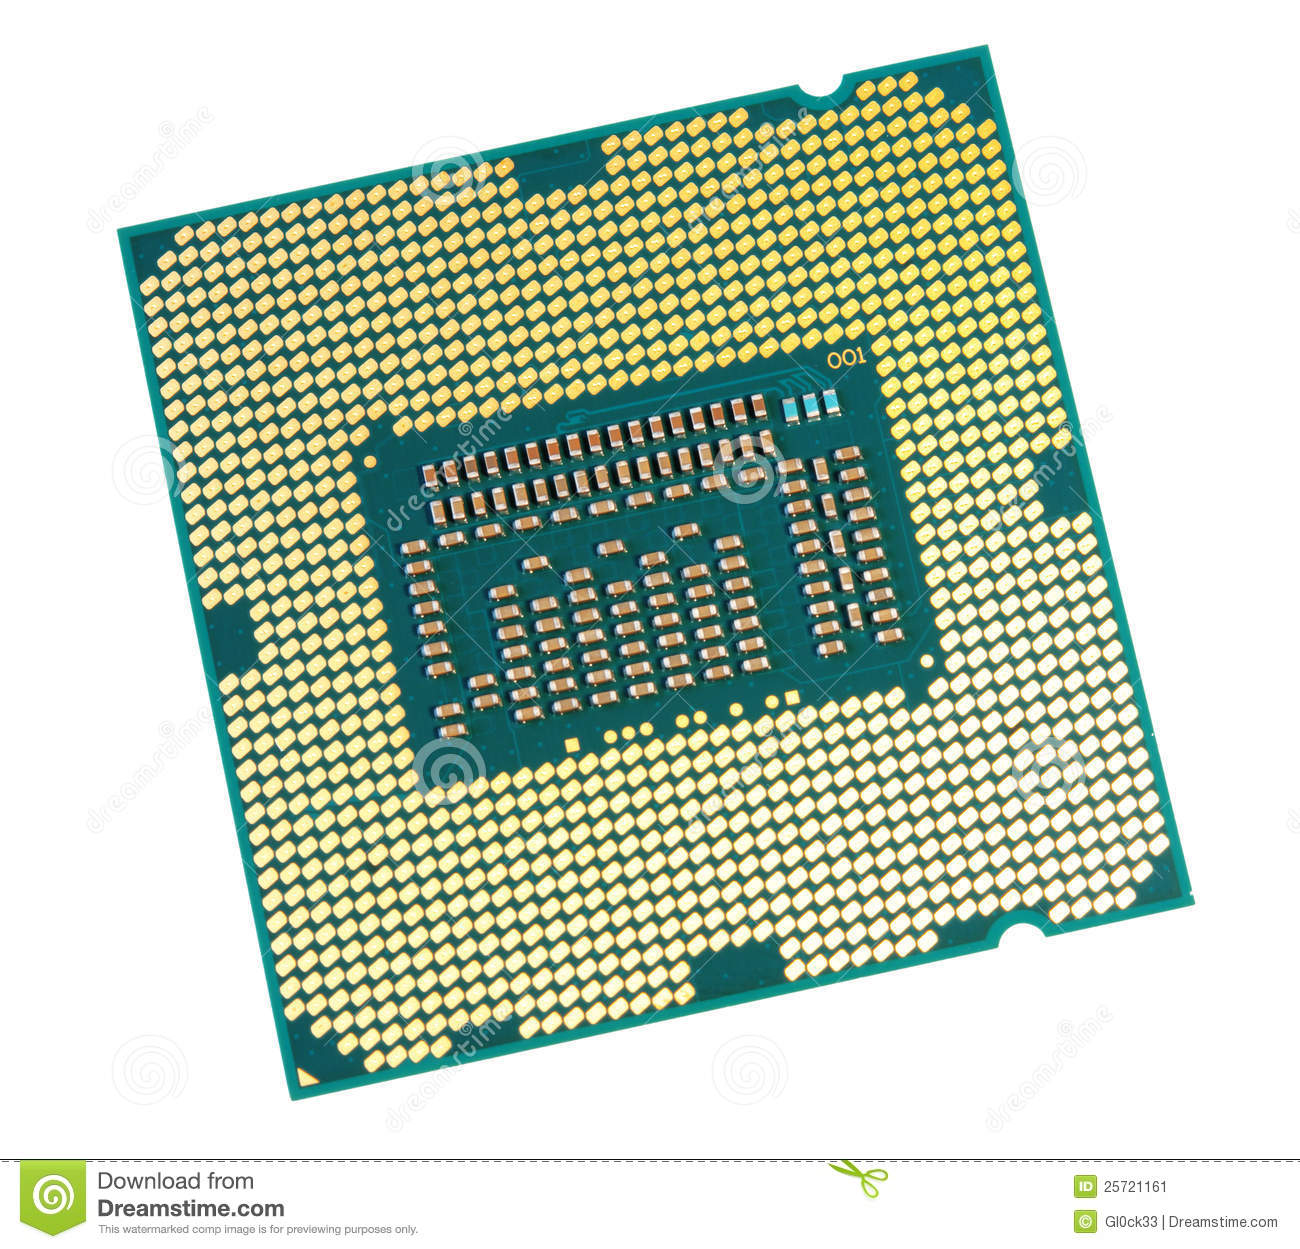 More Similar Stock Images Of   Computer Processor  